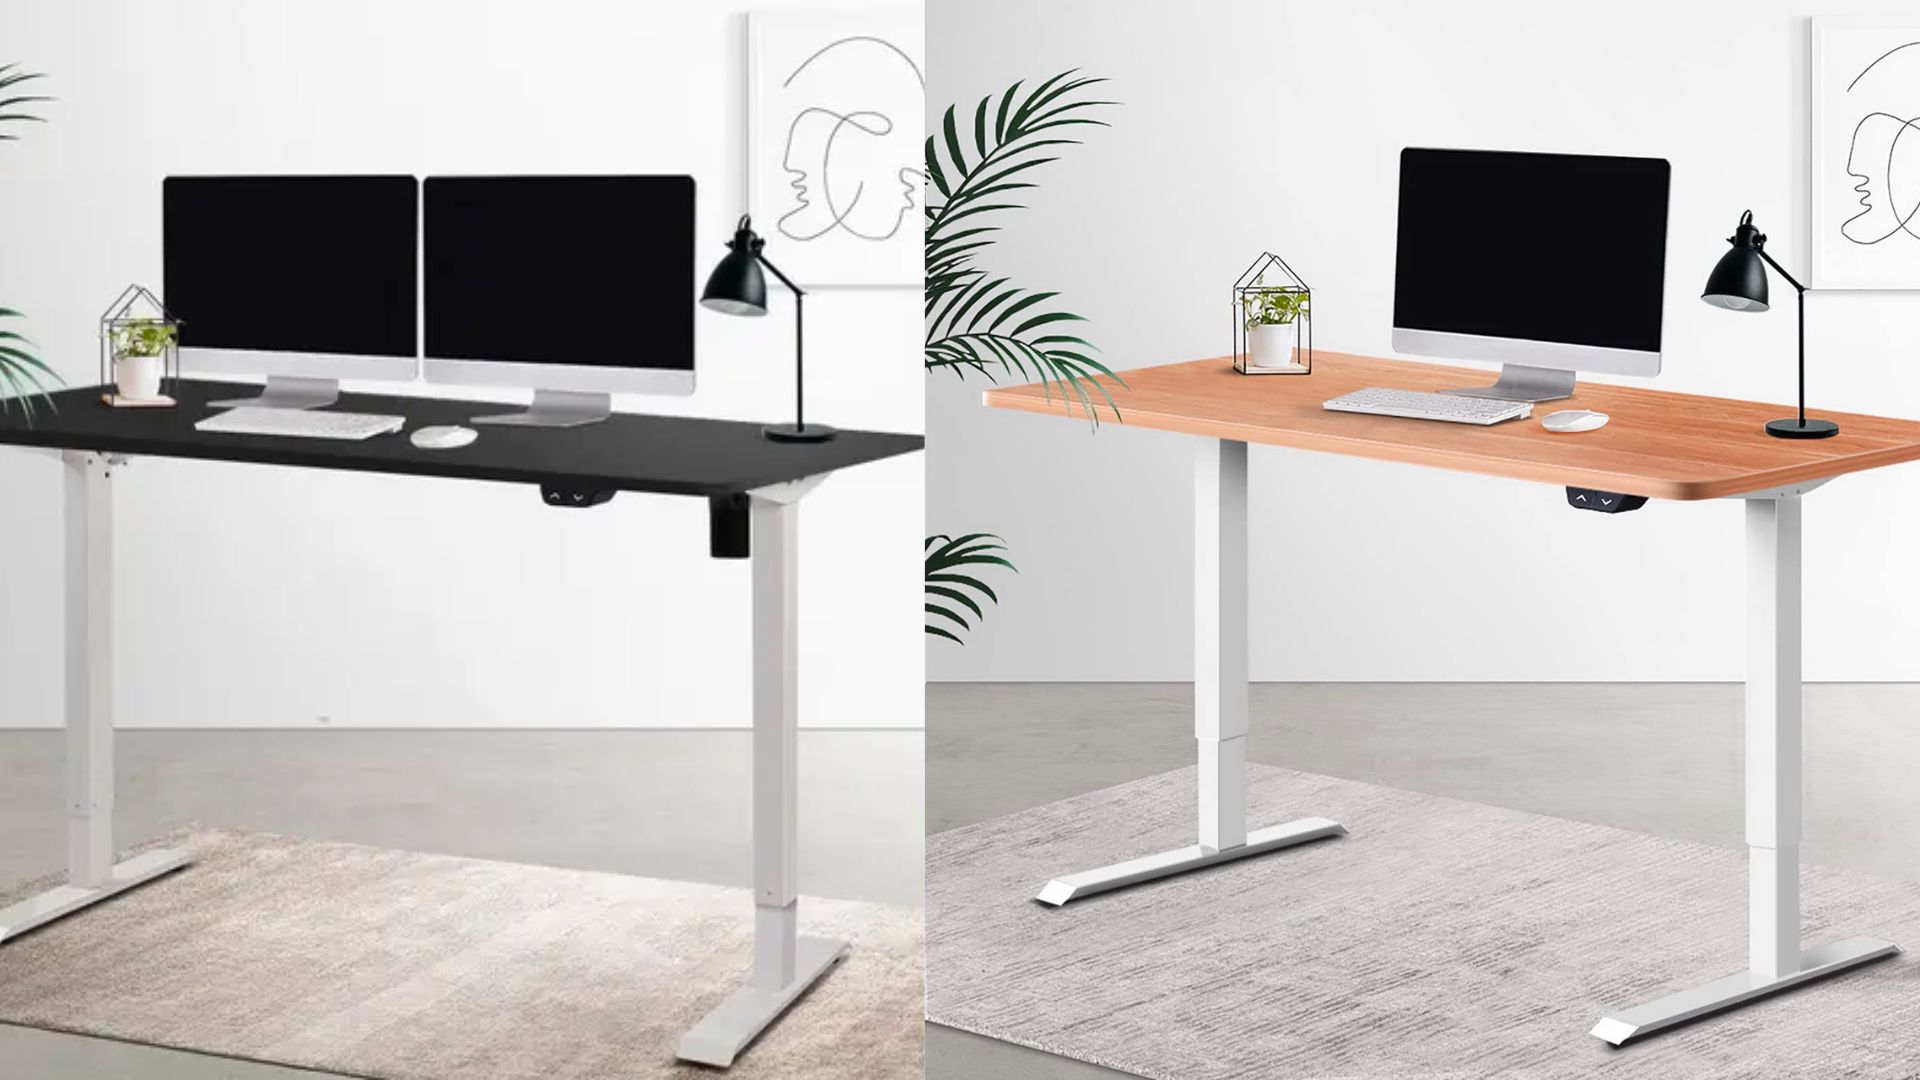 Work desk accessories you never knew you needed » Gadget Flow